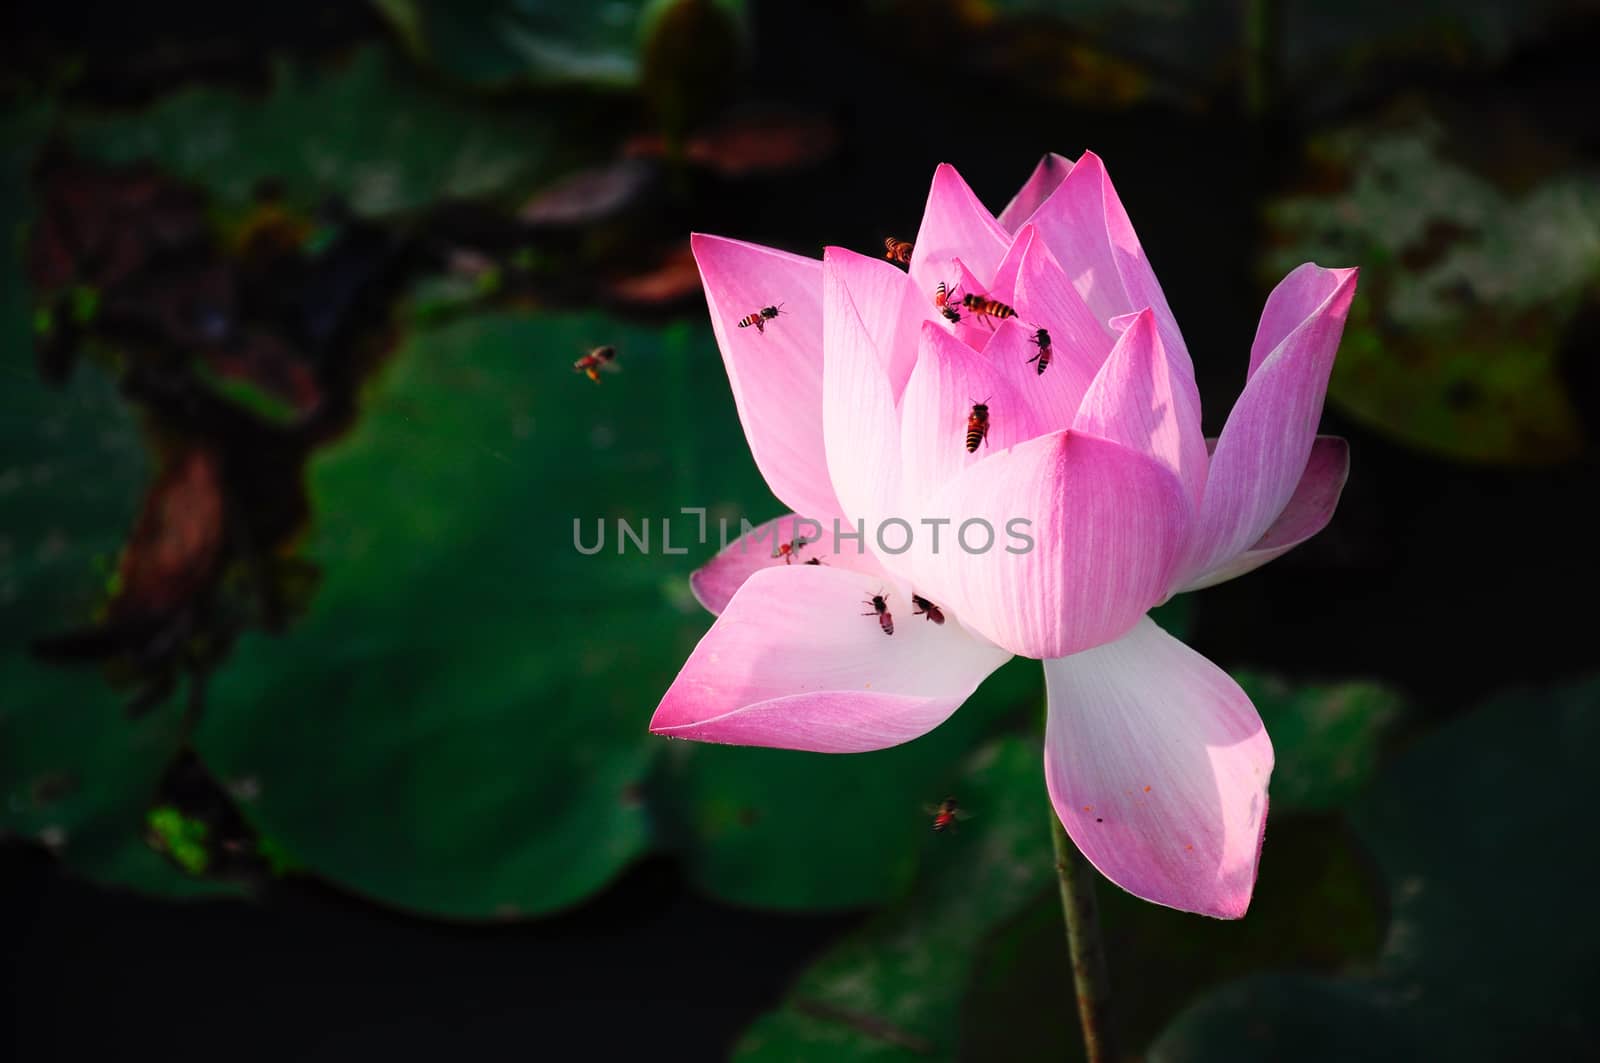 BENTRE PROVINCE - SEPTEMBER 4: Bees are getting nectar from bud of lotus flower on early morning in September 4 2011 MeKong delta, Vietnam.